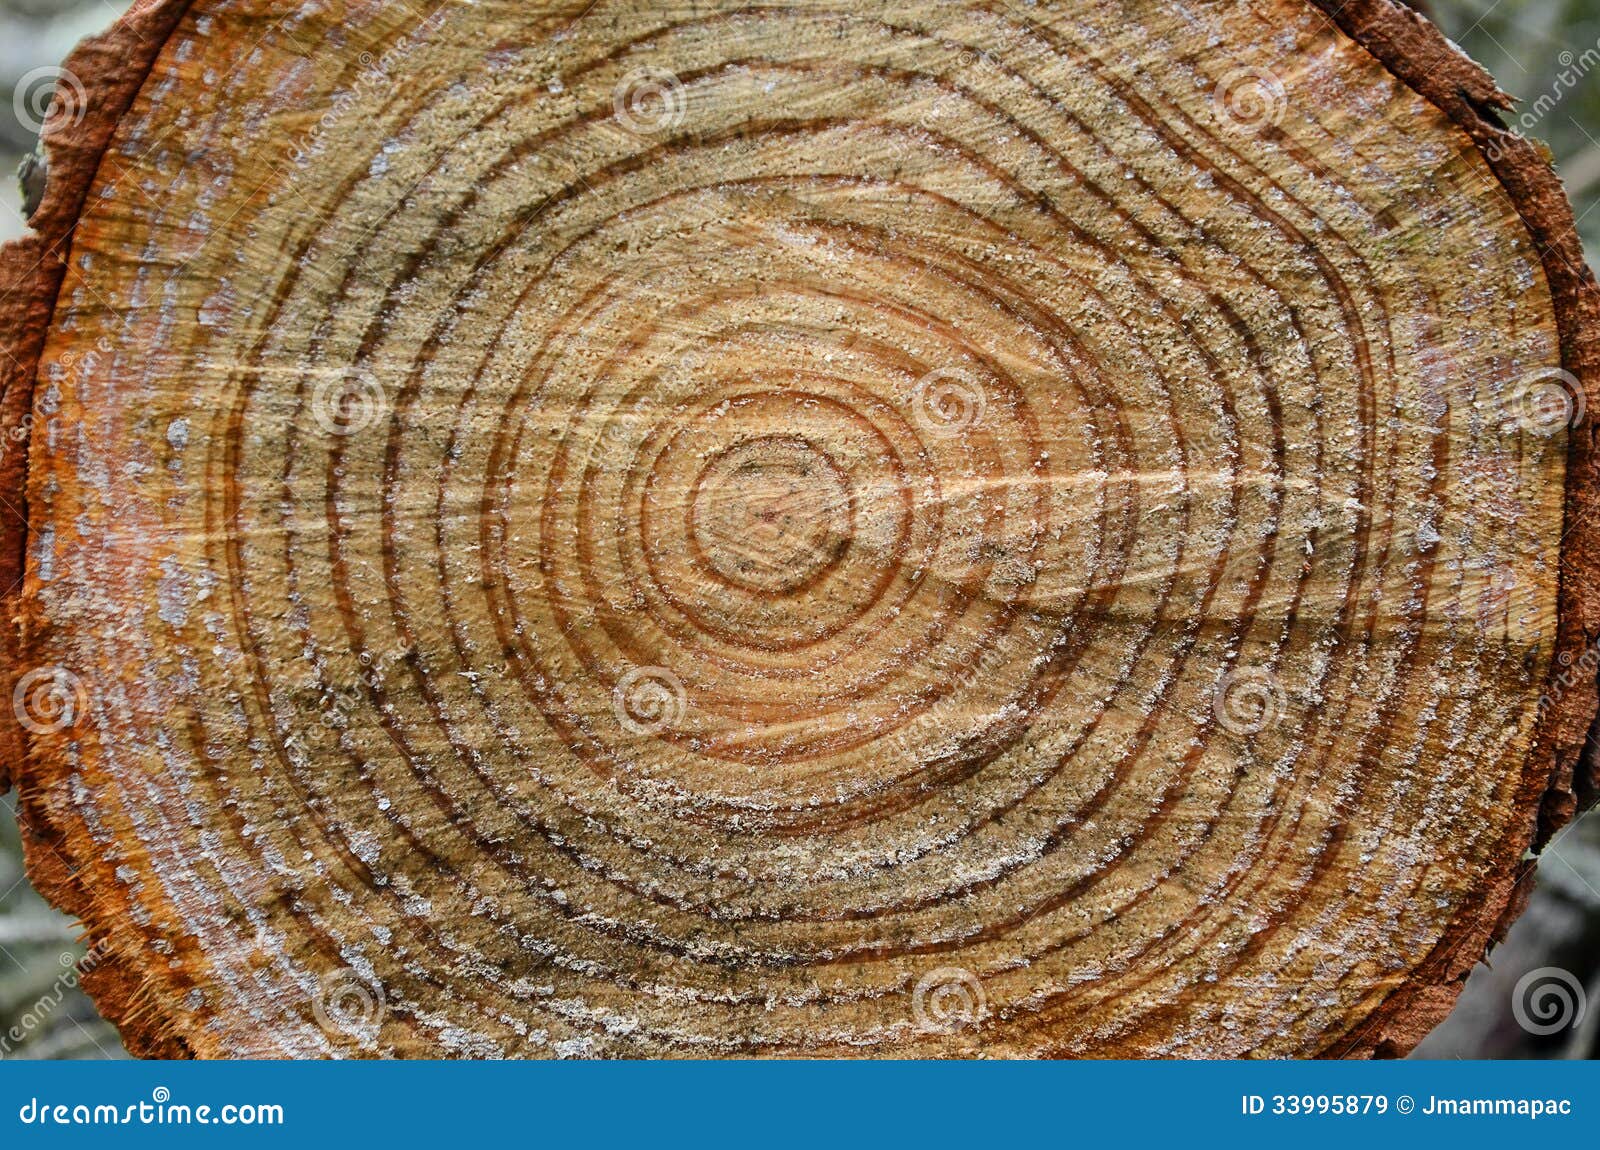 Cross Section Of Tree Trunk Showing Growth Rings Royalty Free SVG,  Cliparts, Vectors, and Stock Illustration. Image 8350896.